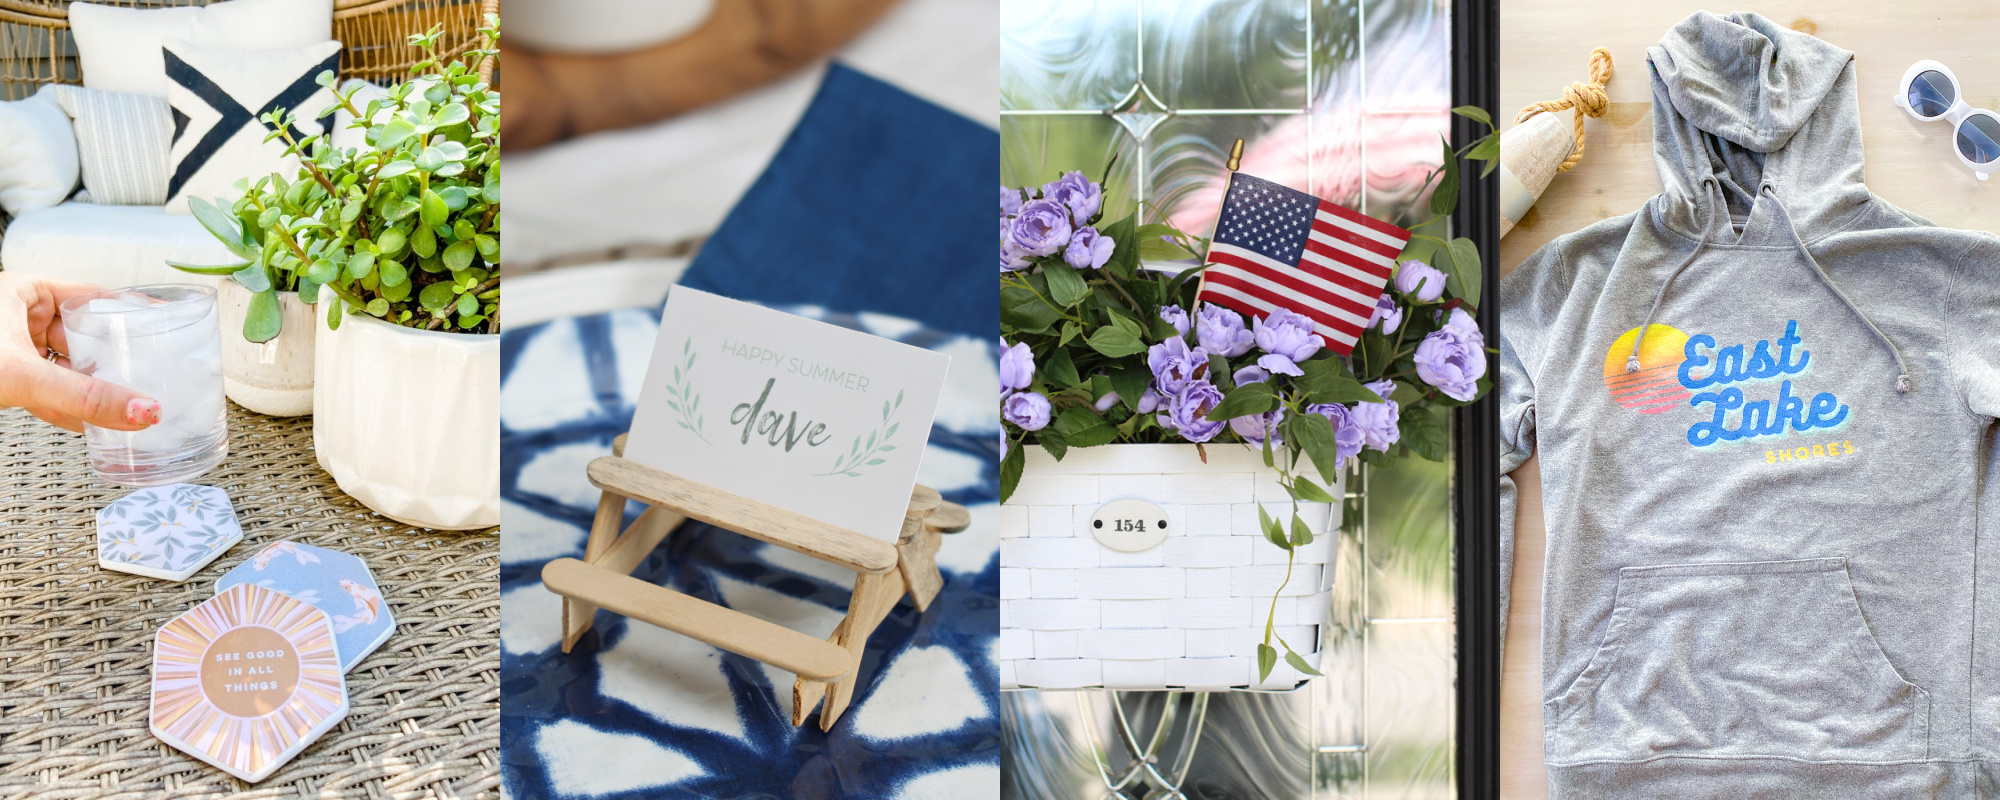 DIY Beaded Garland by popular Alabama DIY blog, She Gave It A Go: collage image of DIY hexagon coasters, DIY picnic table name card holders, DIY basket wreath filled with purple flowers and a mini American flag, and a East Lake hoodie.  